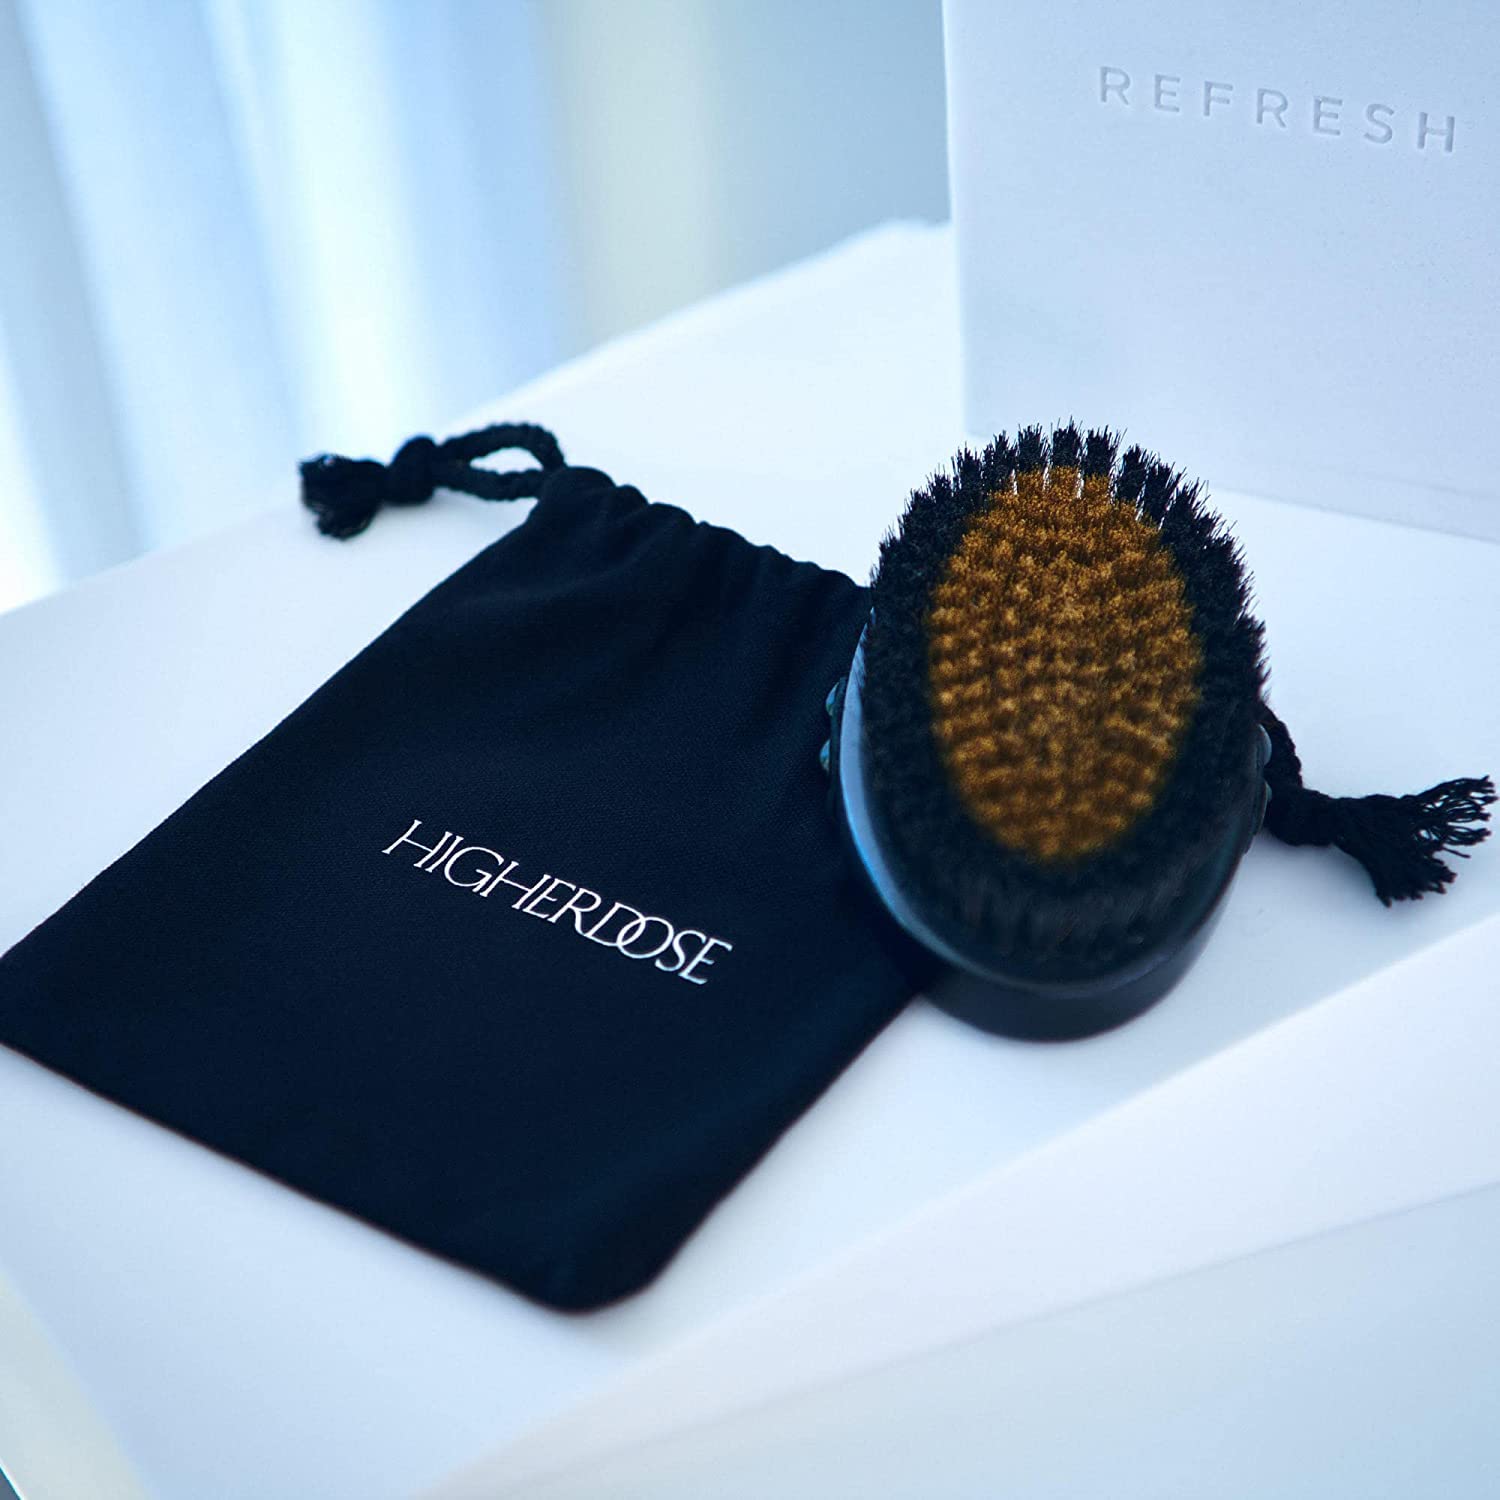 HigherDOSE Supercharge Copper Body Brush - Lymphatic Drainage Brush to Accelerate Drainage of Toxins & Fat - Exfoliating Brush to Reduce Cellulite & Soften Skin - Dry Brush with Ion Charged Bristles